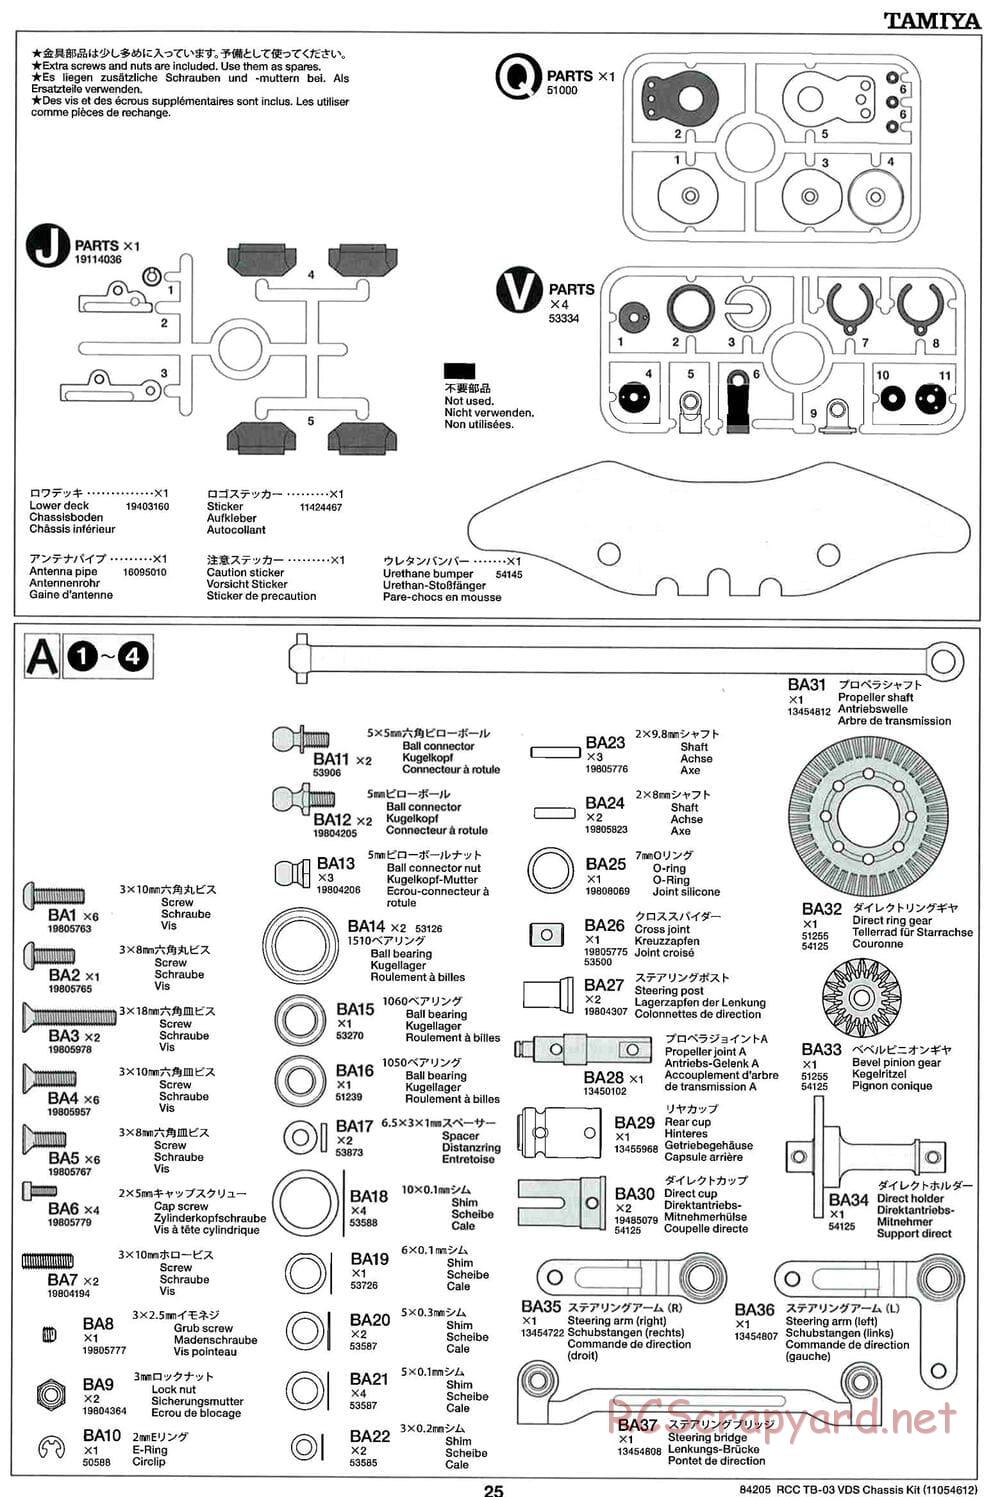 Tamiya - TB-03 VDS Drift Spec Chassis - Manual - Page 25